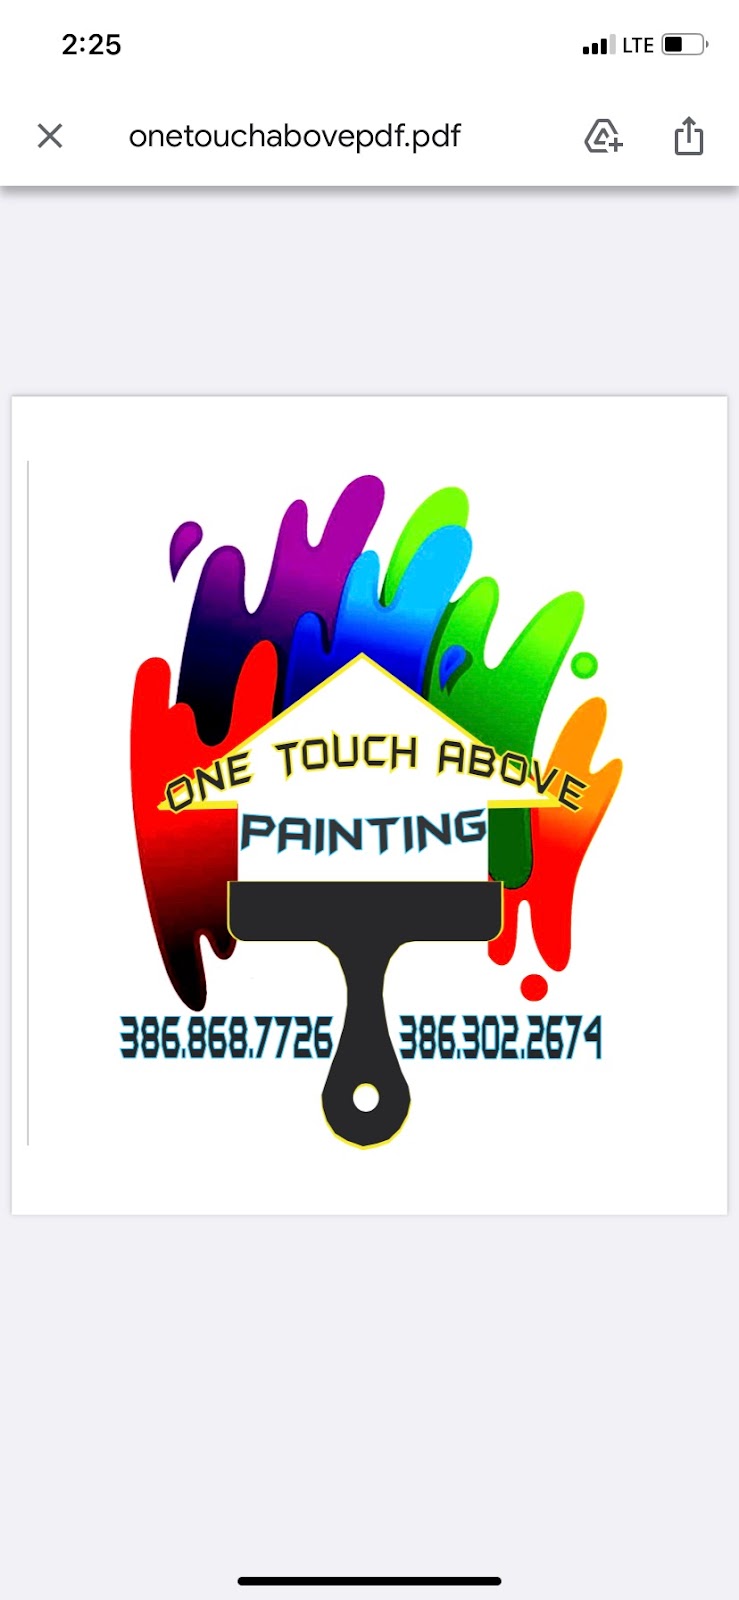 One touch above painting | 15 Palm Harbor Village Way W, Palm Coast, FL 32137, USA | Phone: (386) 868-7726